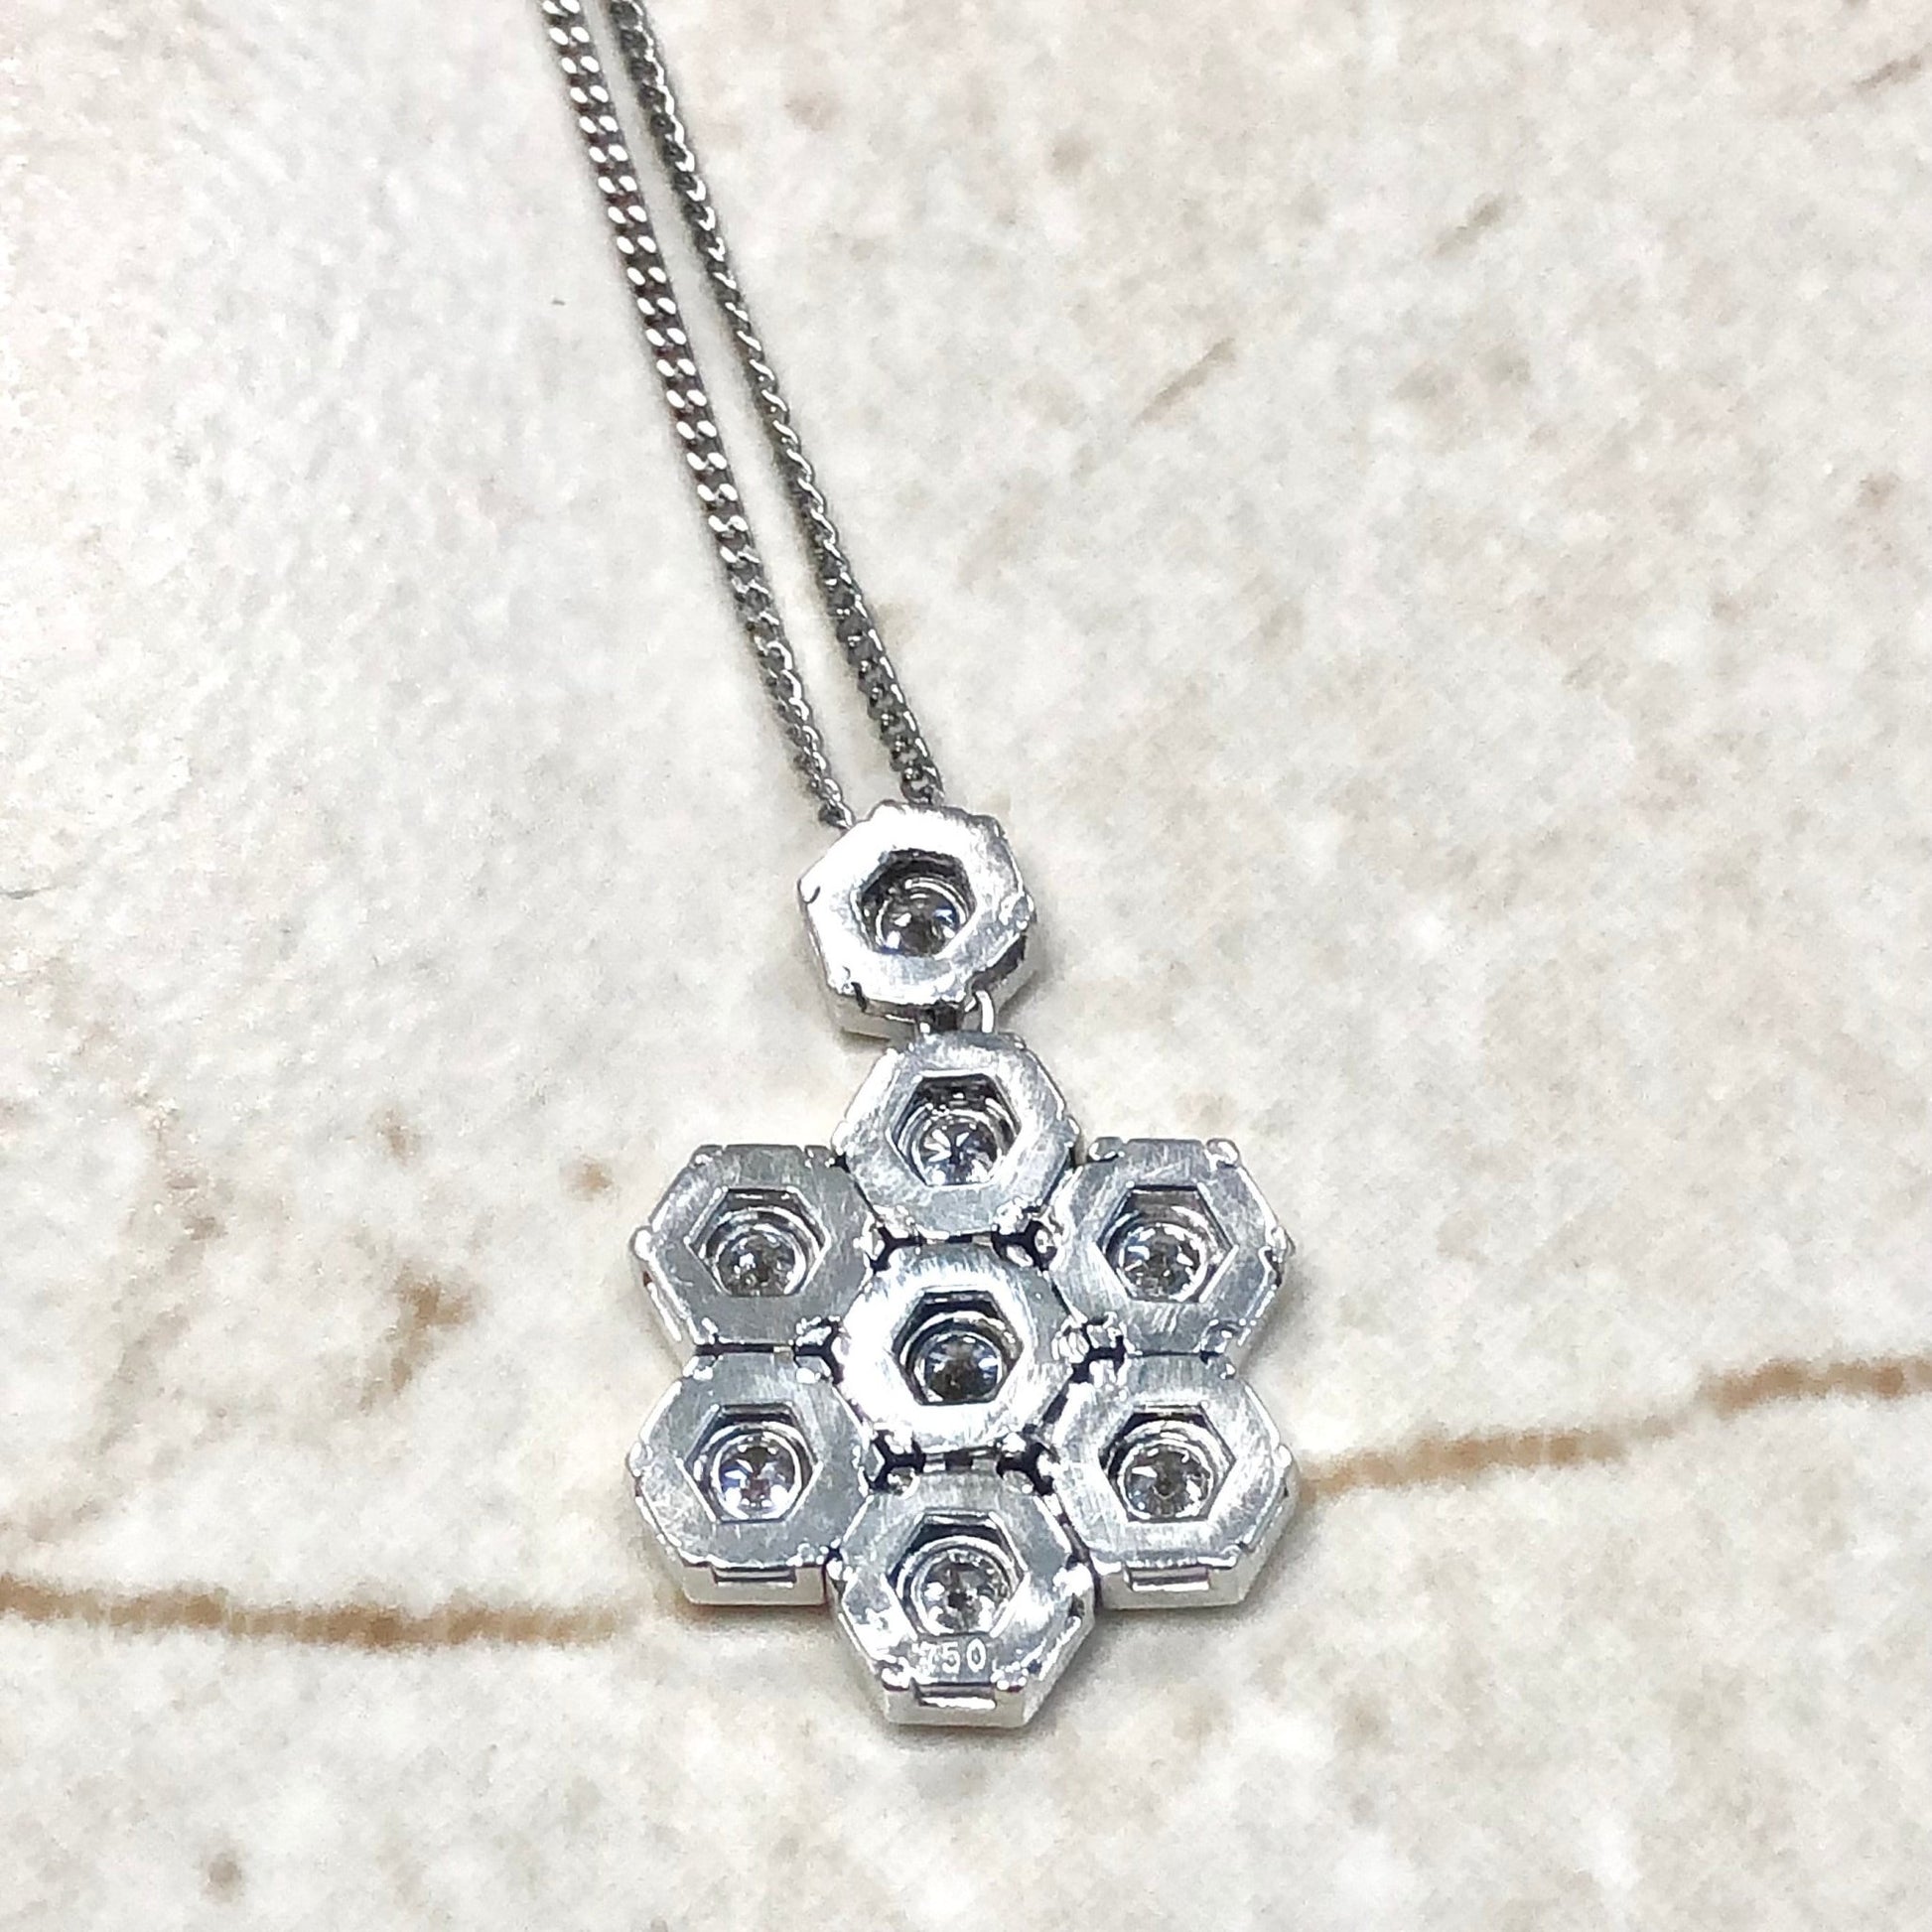 Handcrafted 18K Diamond Snowflake Pendant Necklace By Carvin French - 18K White Gold Snowflake Necklace - Diamond Necklace - Diamond Pendant